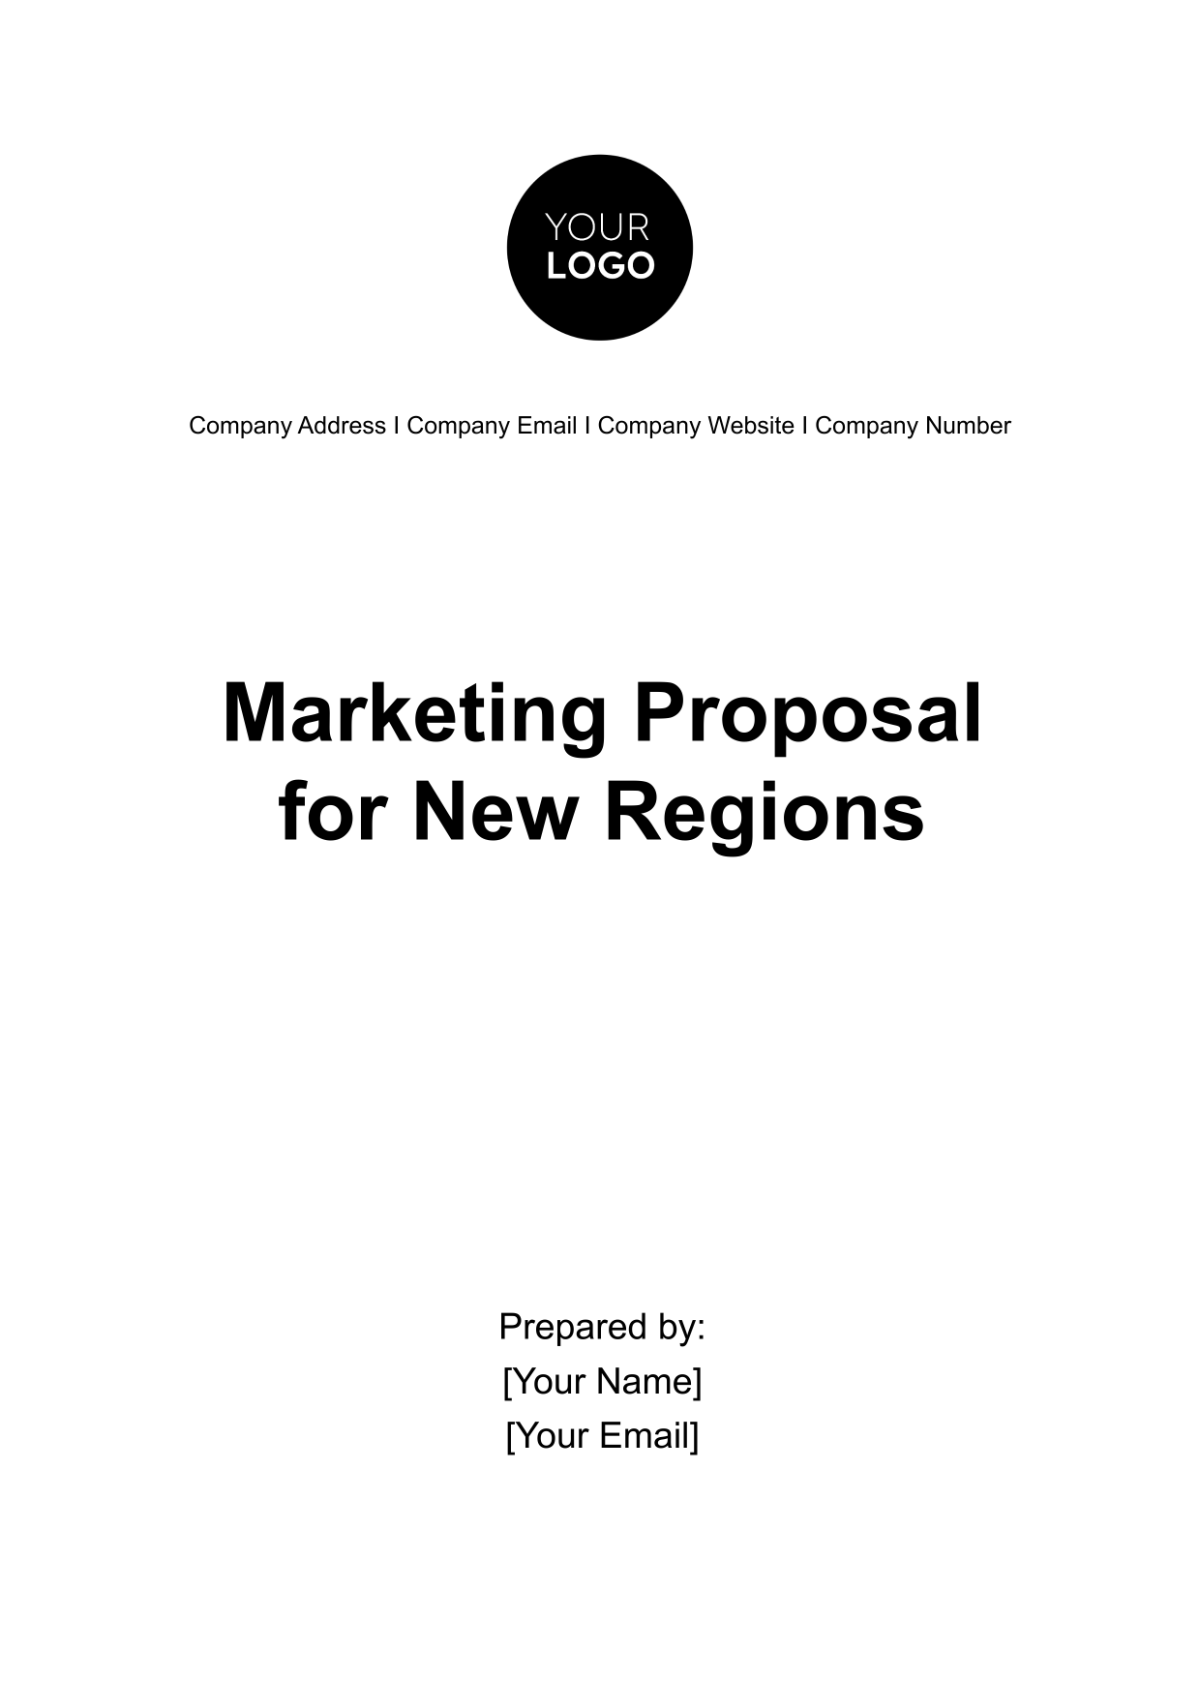 Free Marketing Proposal for New Regions Template